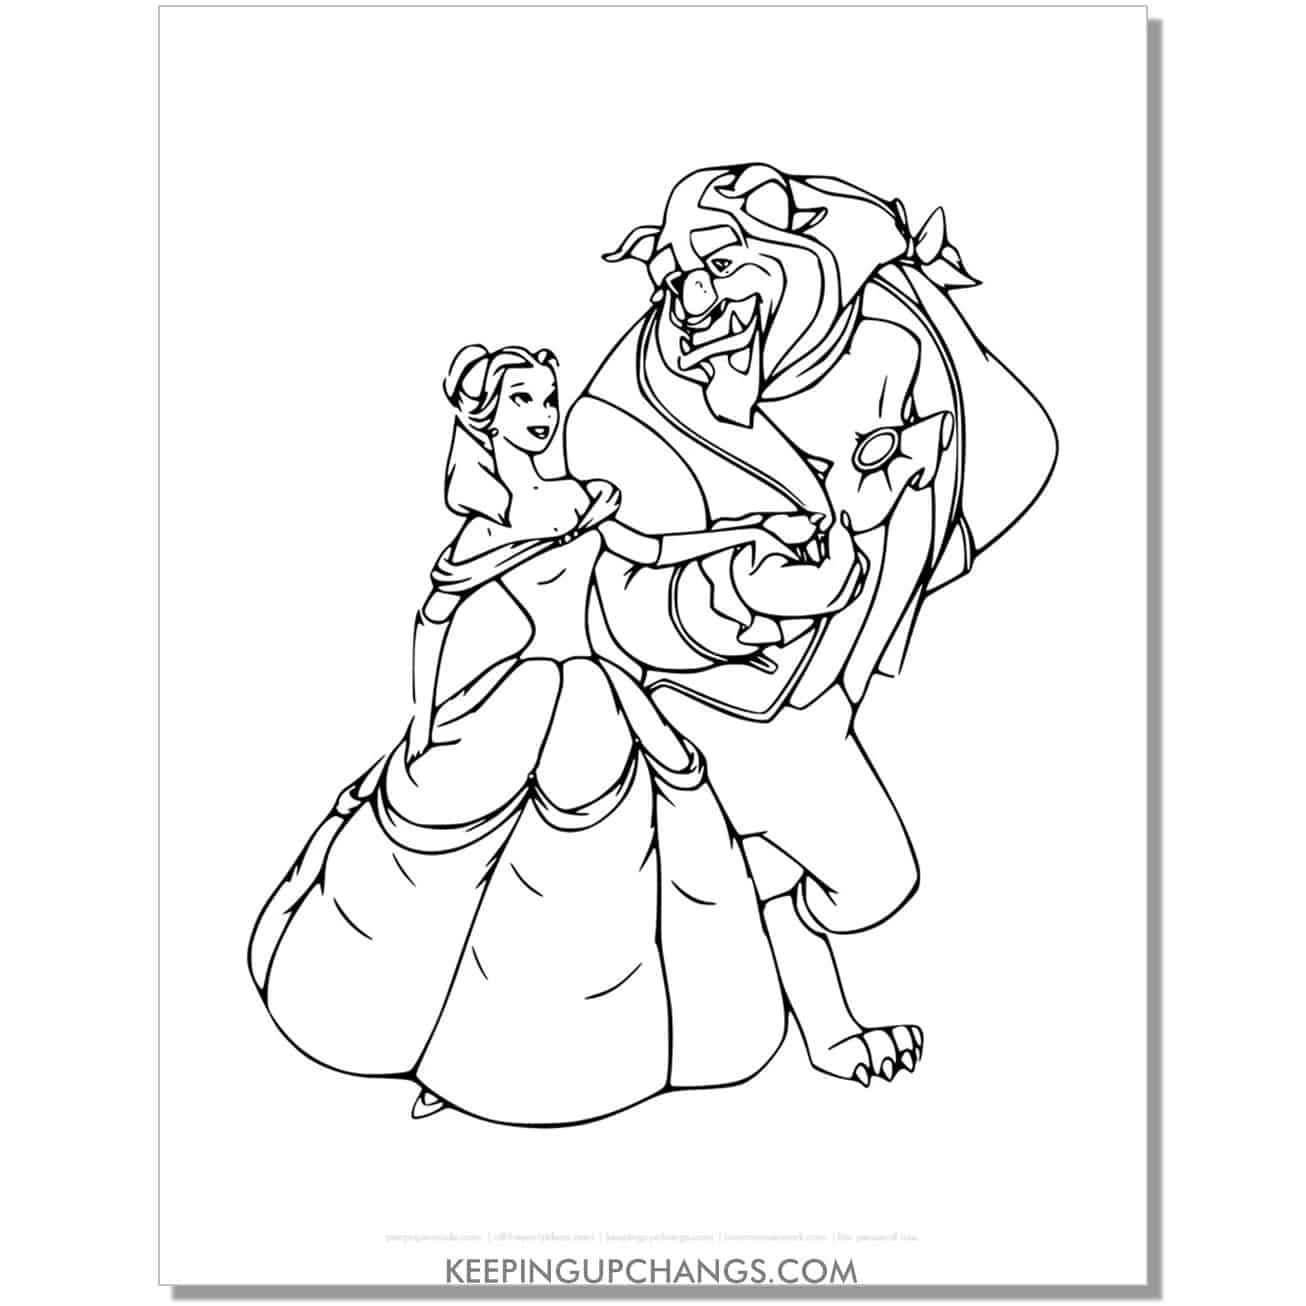 beauty and beast enter ball coloring page, sheet.